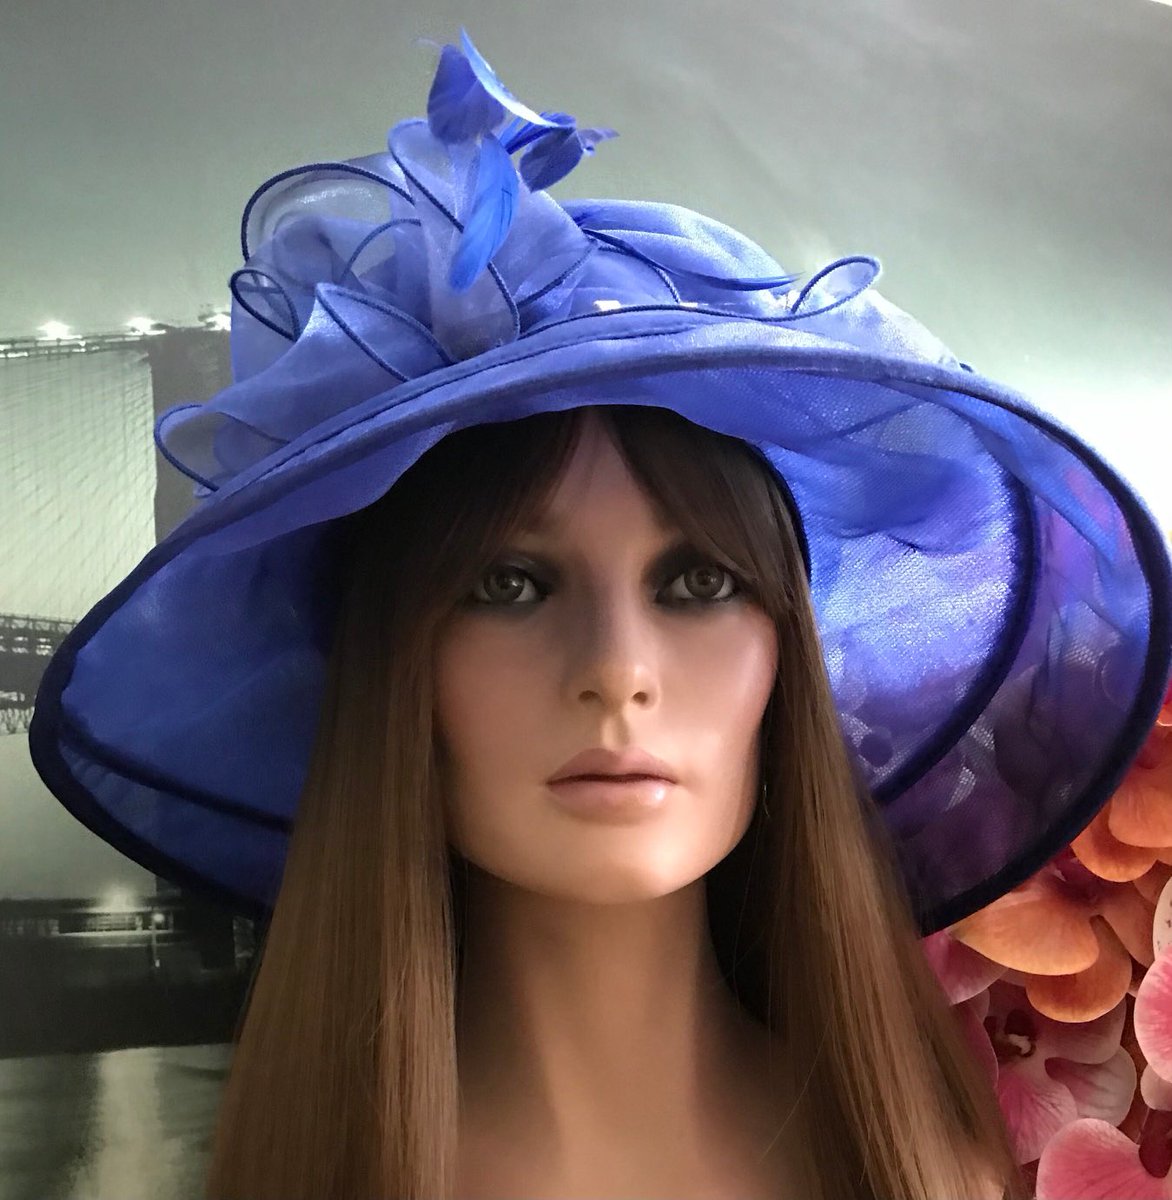 Excited to share the latest addition to my #etsy shop: Cobalt electric blue vintage organza hat with bespoke hat handmade hat pin by classic millinery summer / vintage / church / wedding / retro etsy.me/4aIjO30 #blue #wedding #classic #brightblue #summer #cobaltblue